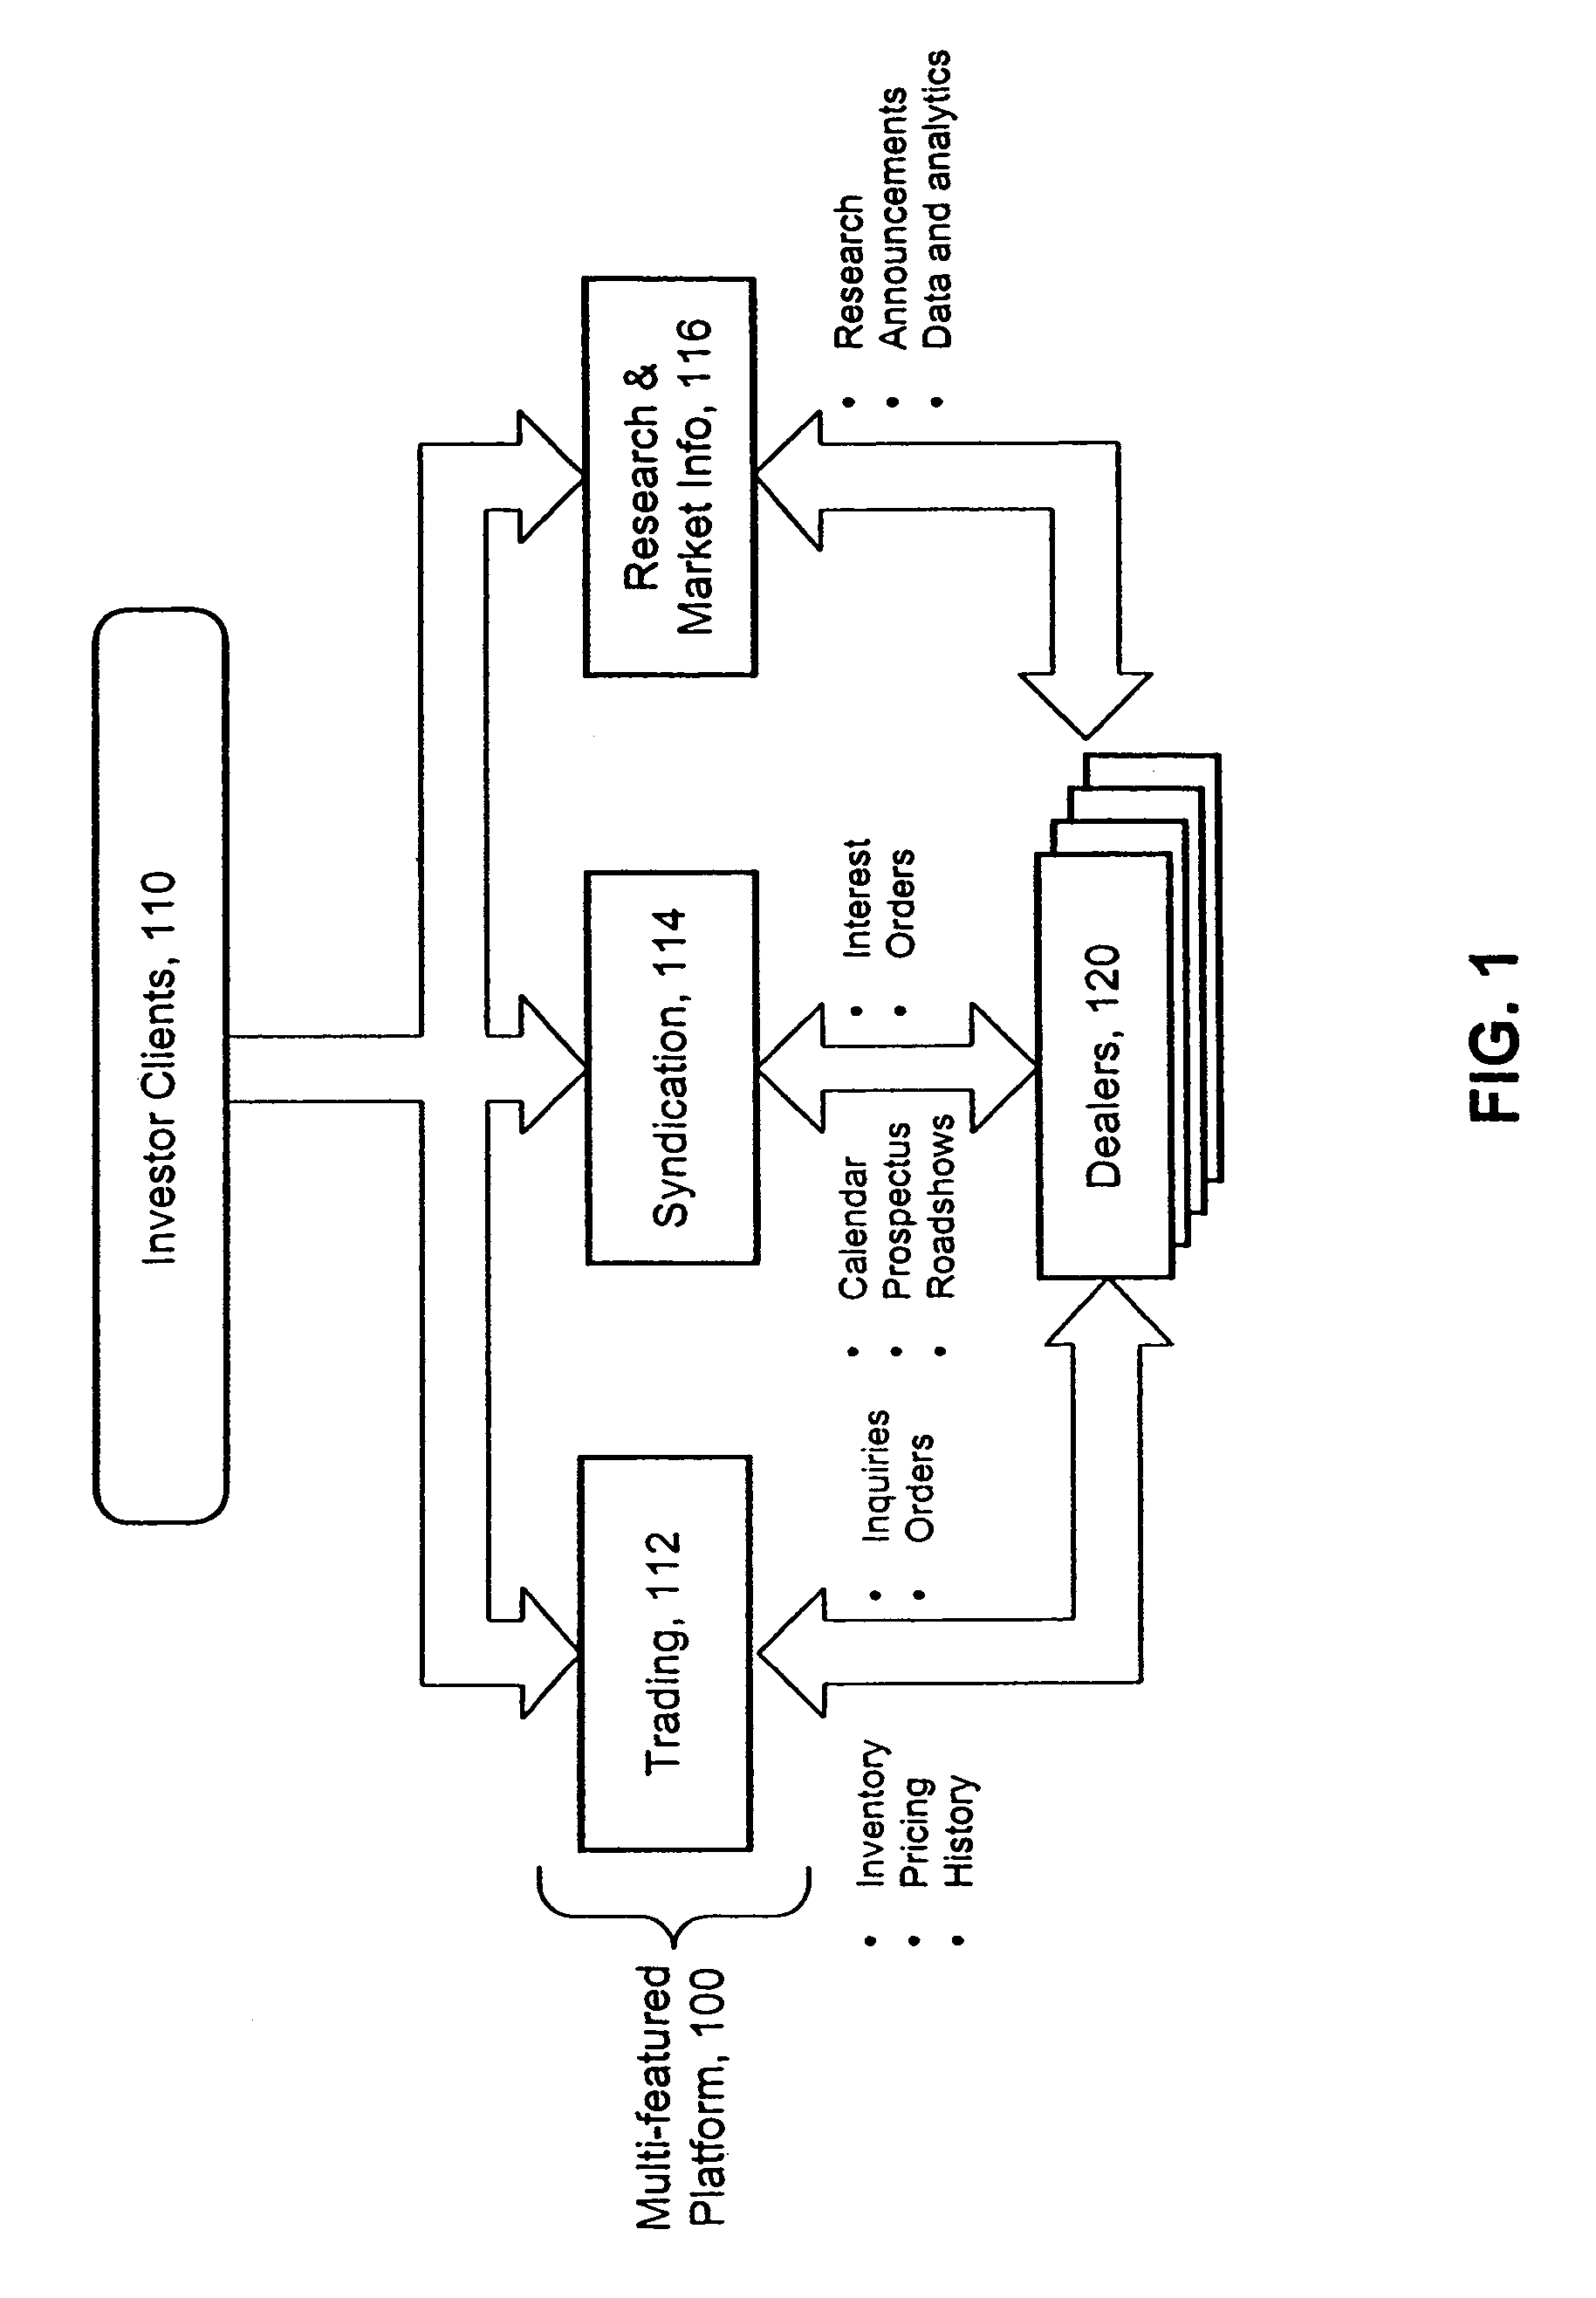 Method and system for computer-implemented trading of secondary market debt securities